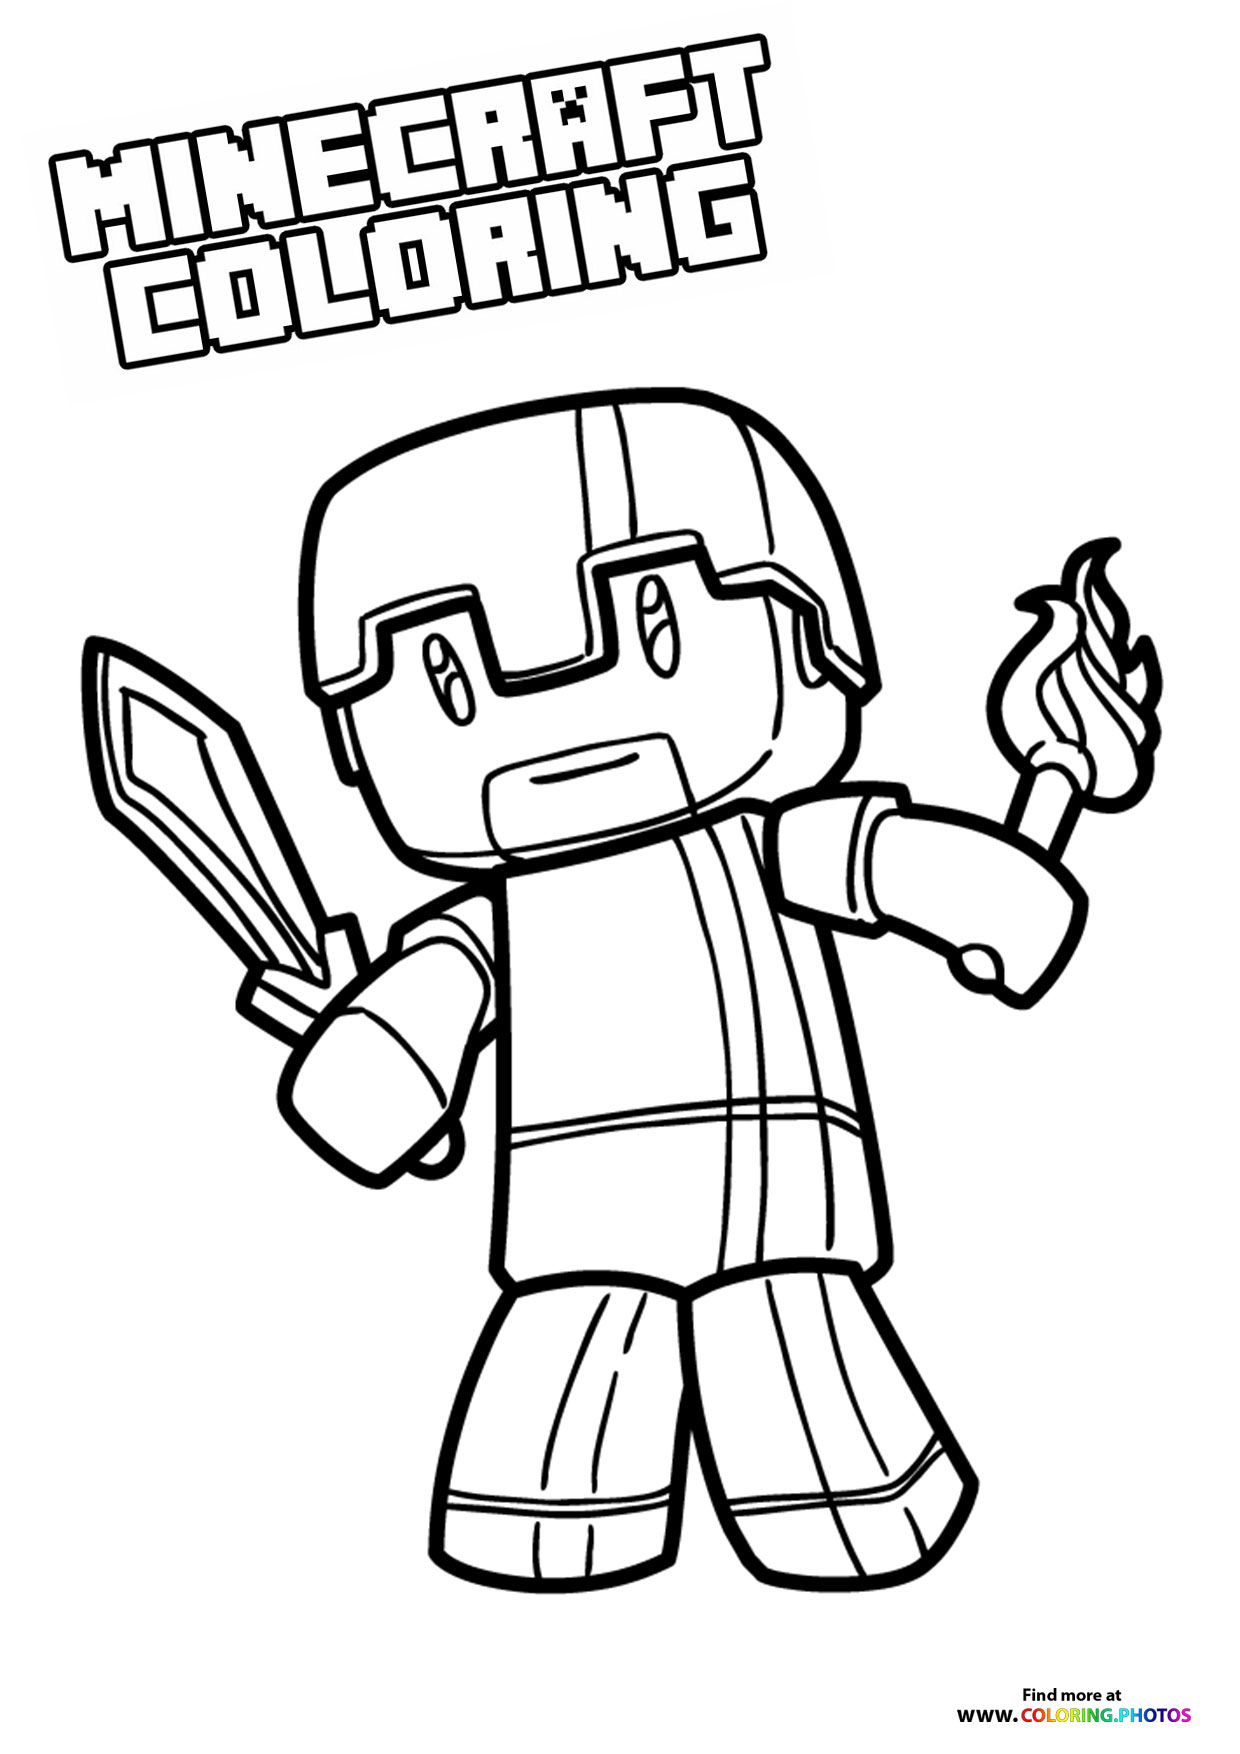 Best Ideas For Coloring Steve From Minecraft Coloring Page The Best Porn Website